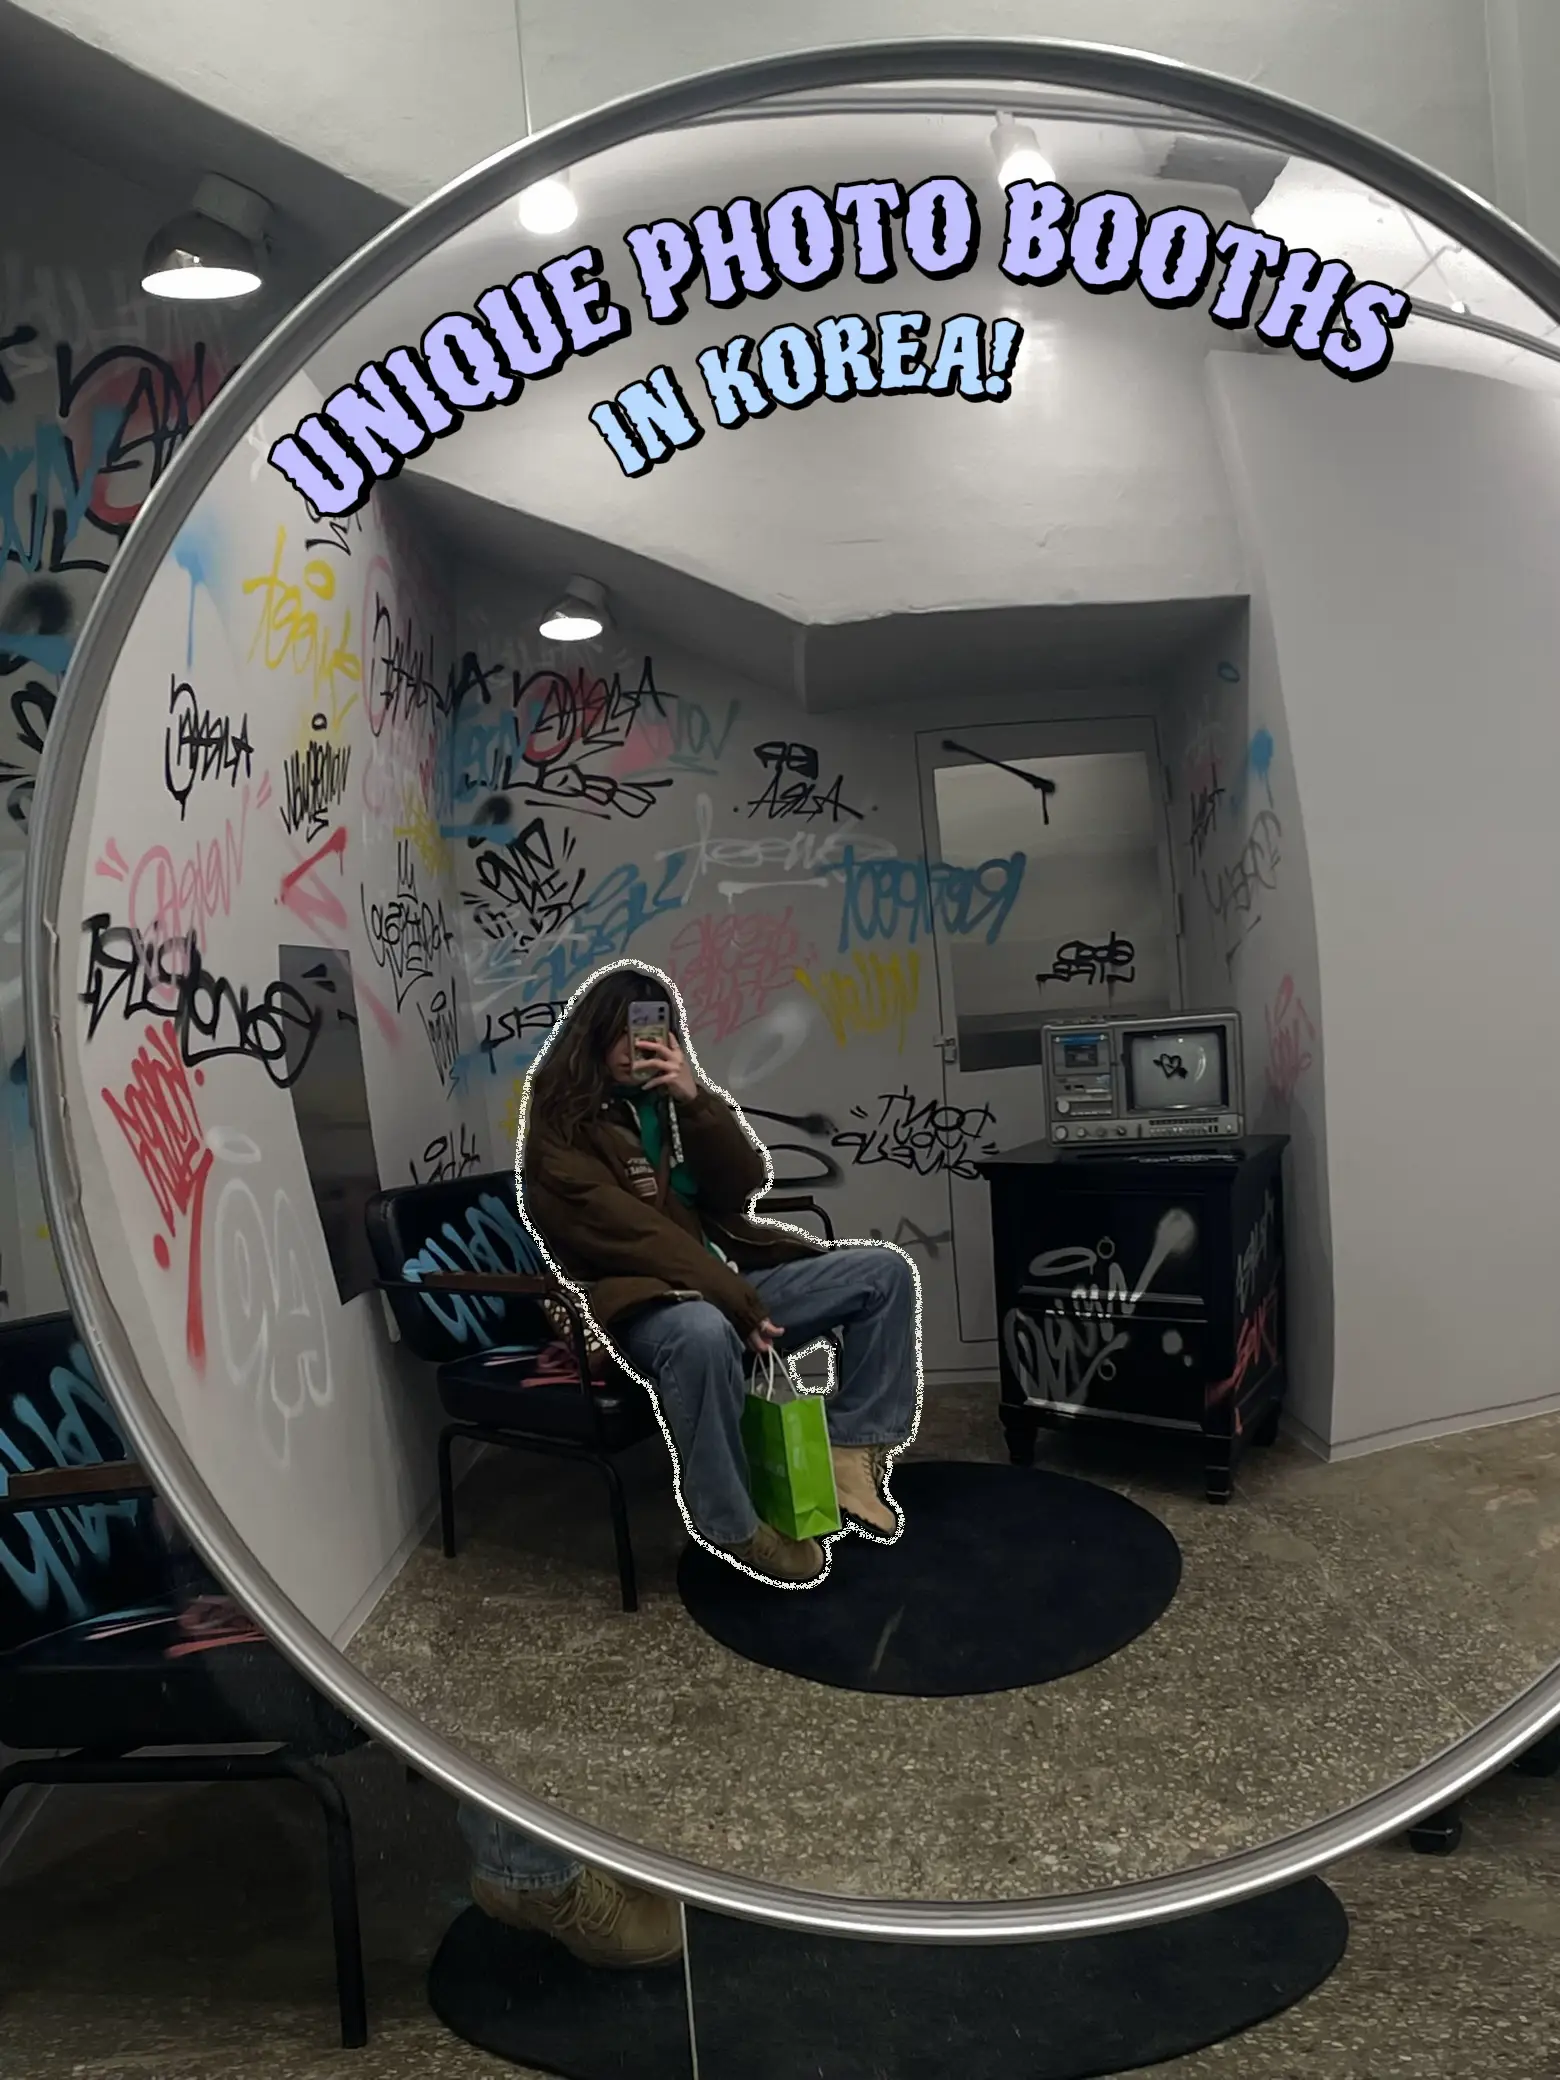 Korean Photo Booths Ultimate Guide - CK Travels